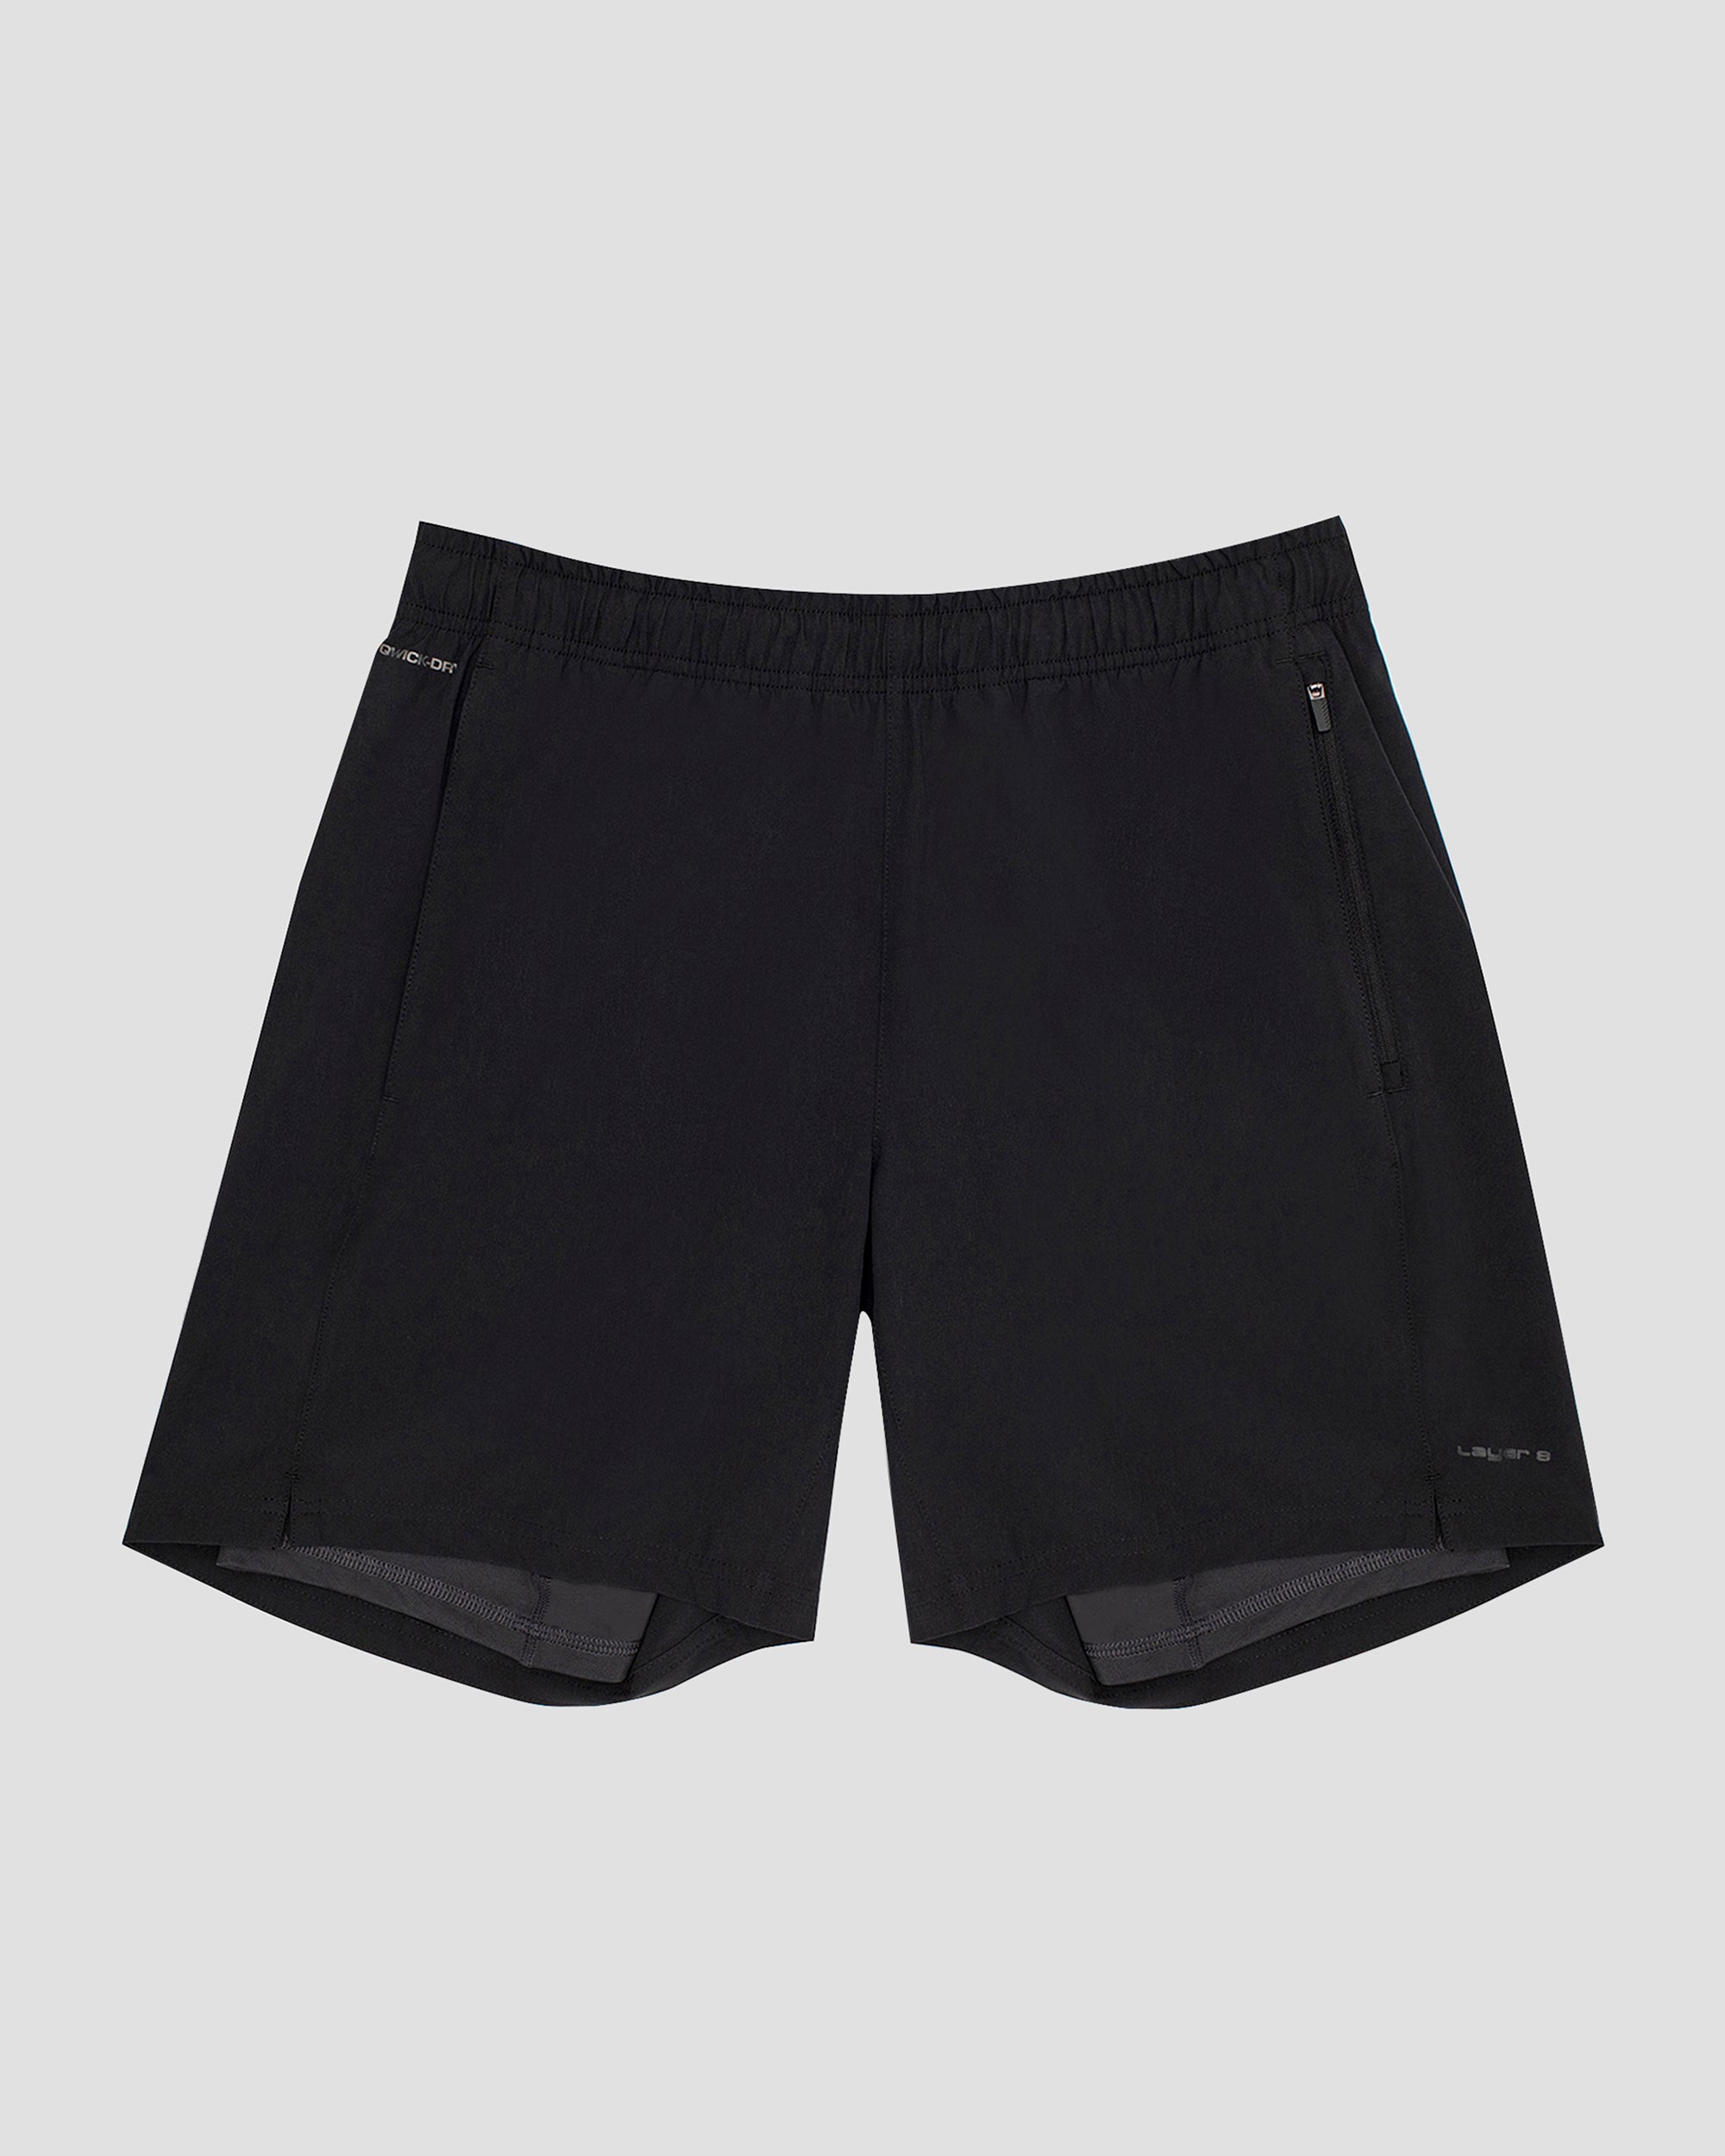 Men's Woven Stretch Alpha Base Running Shorts with Pockets – Layer 8